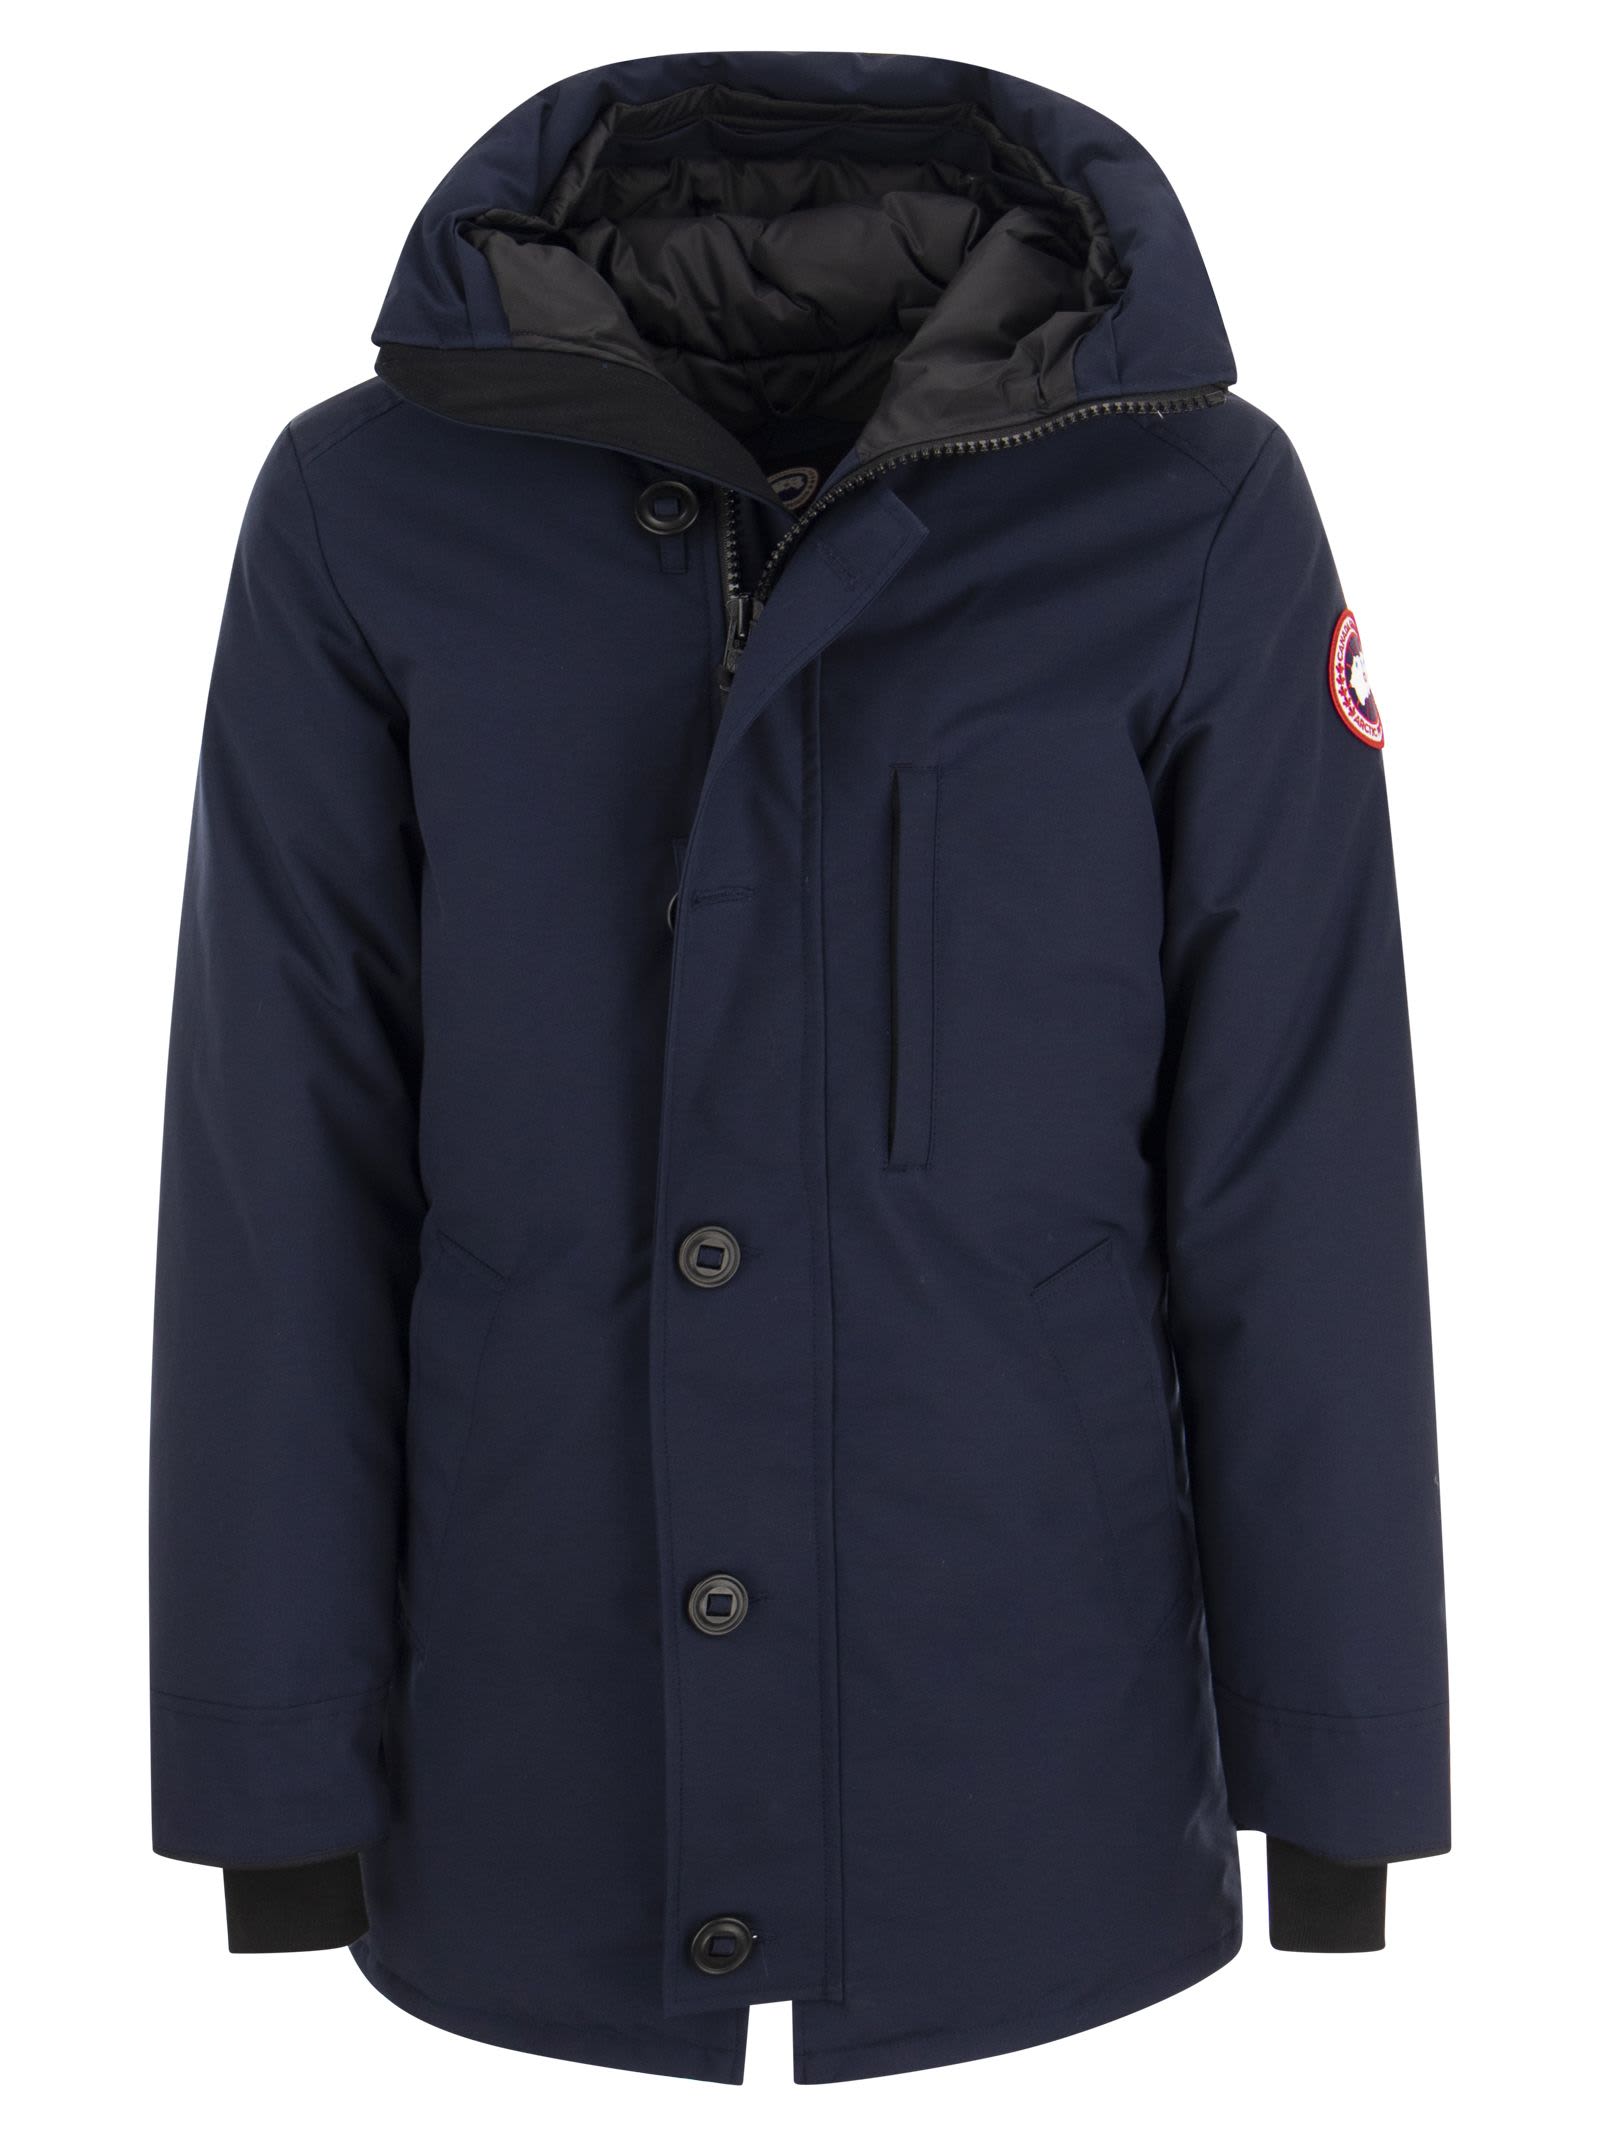 Canada Goose Chateau - Hooded Parka In Black